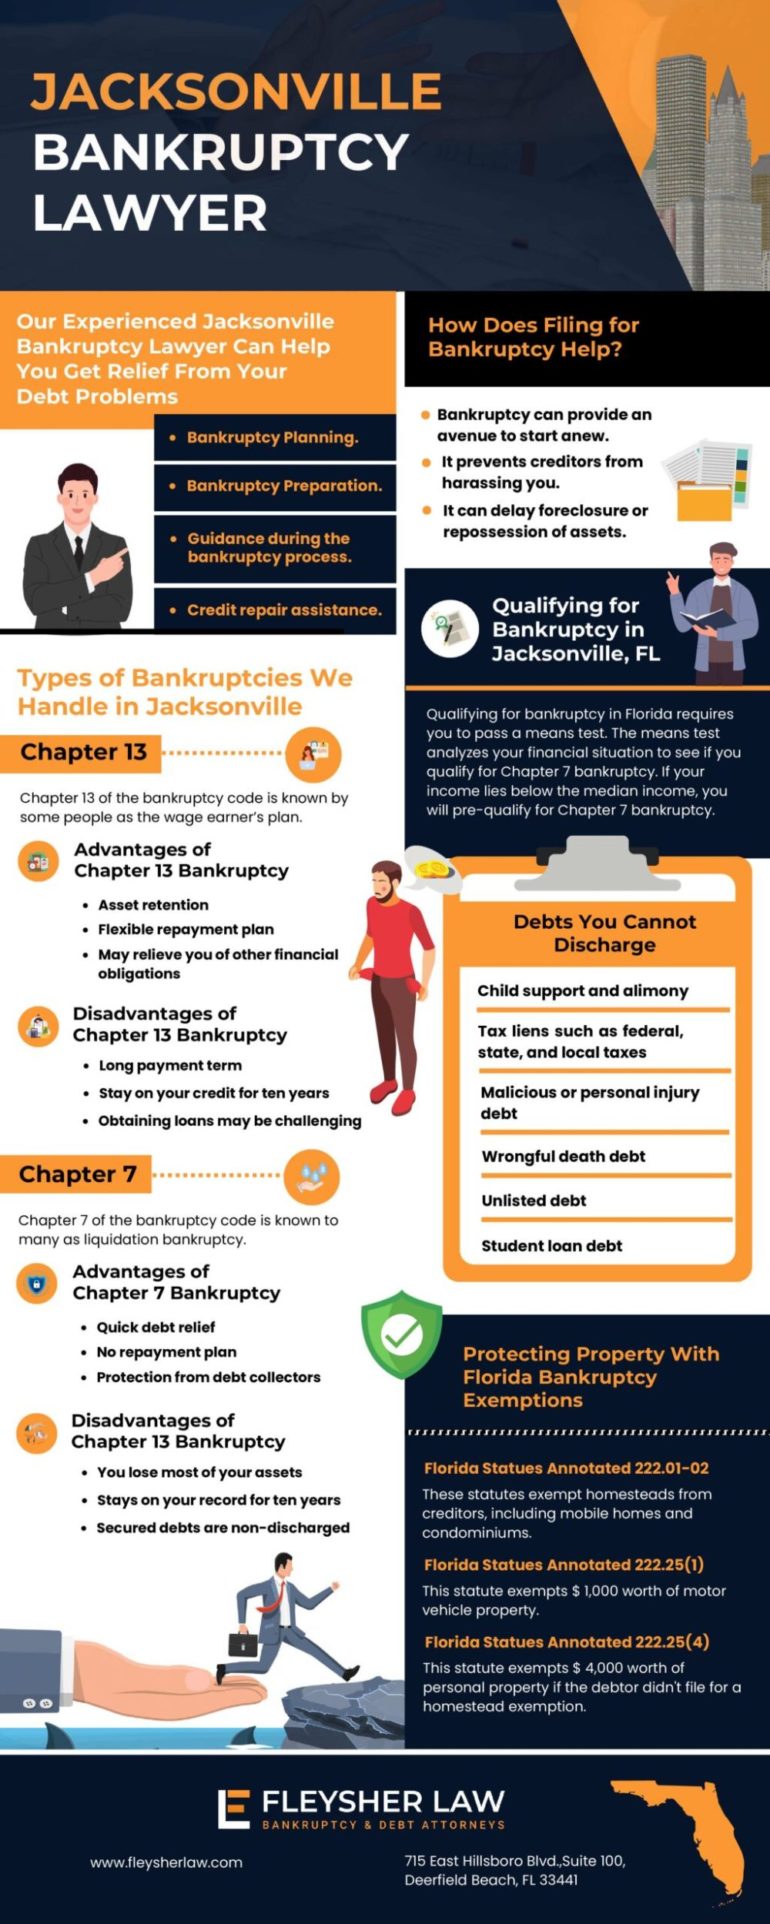 Jacksonville Bankruptcy Lawyer [INFOGRAPHIC]